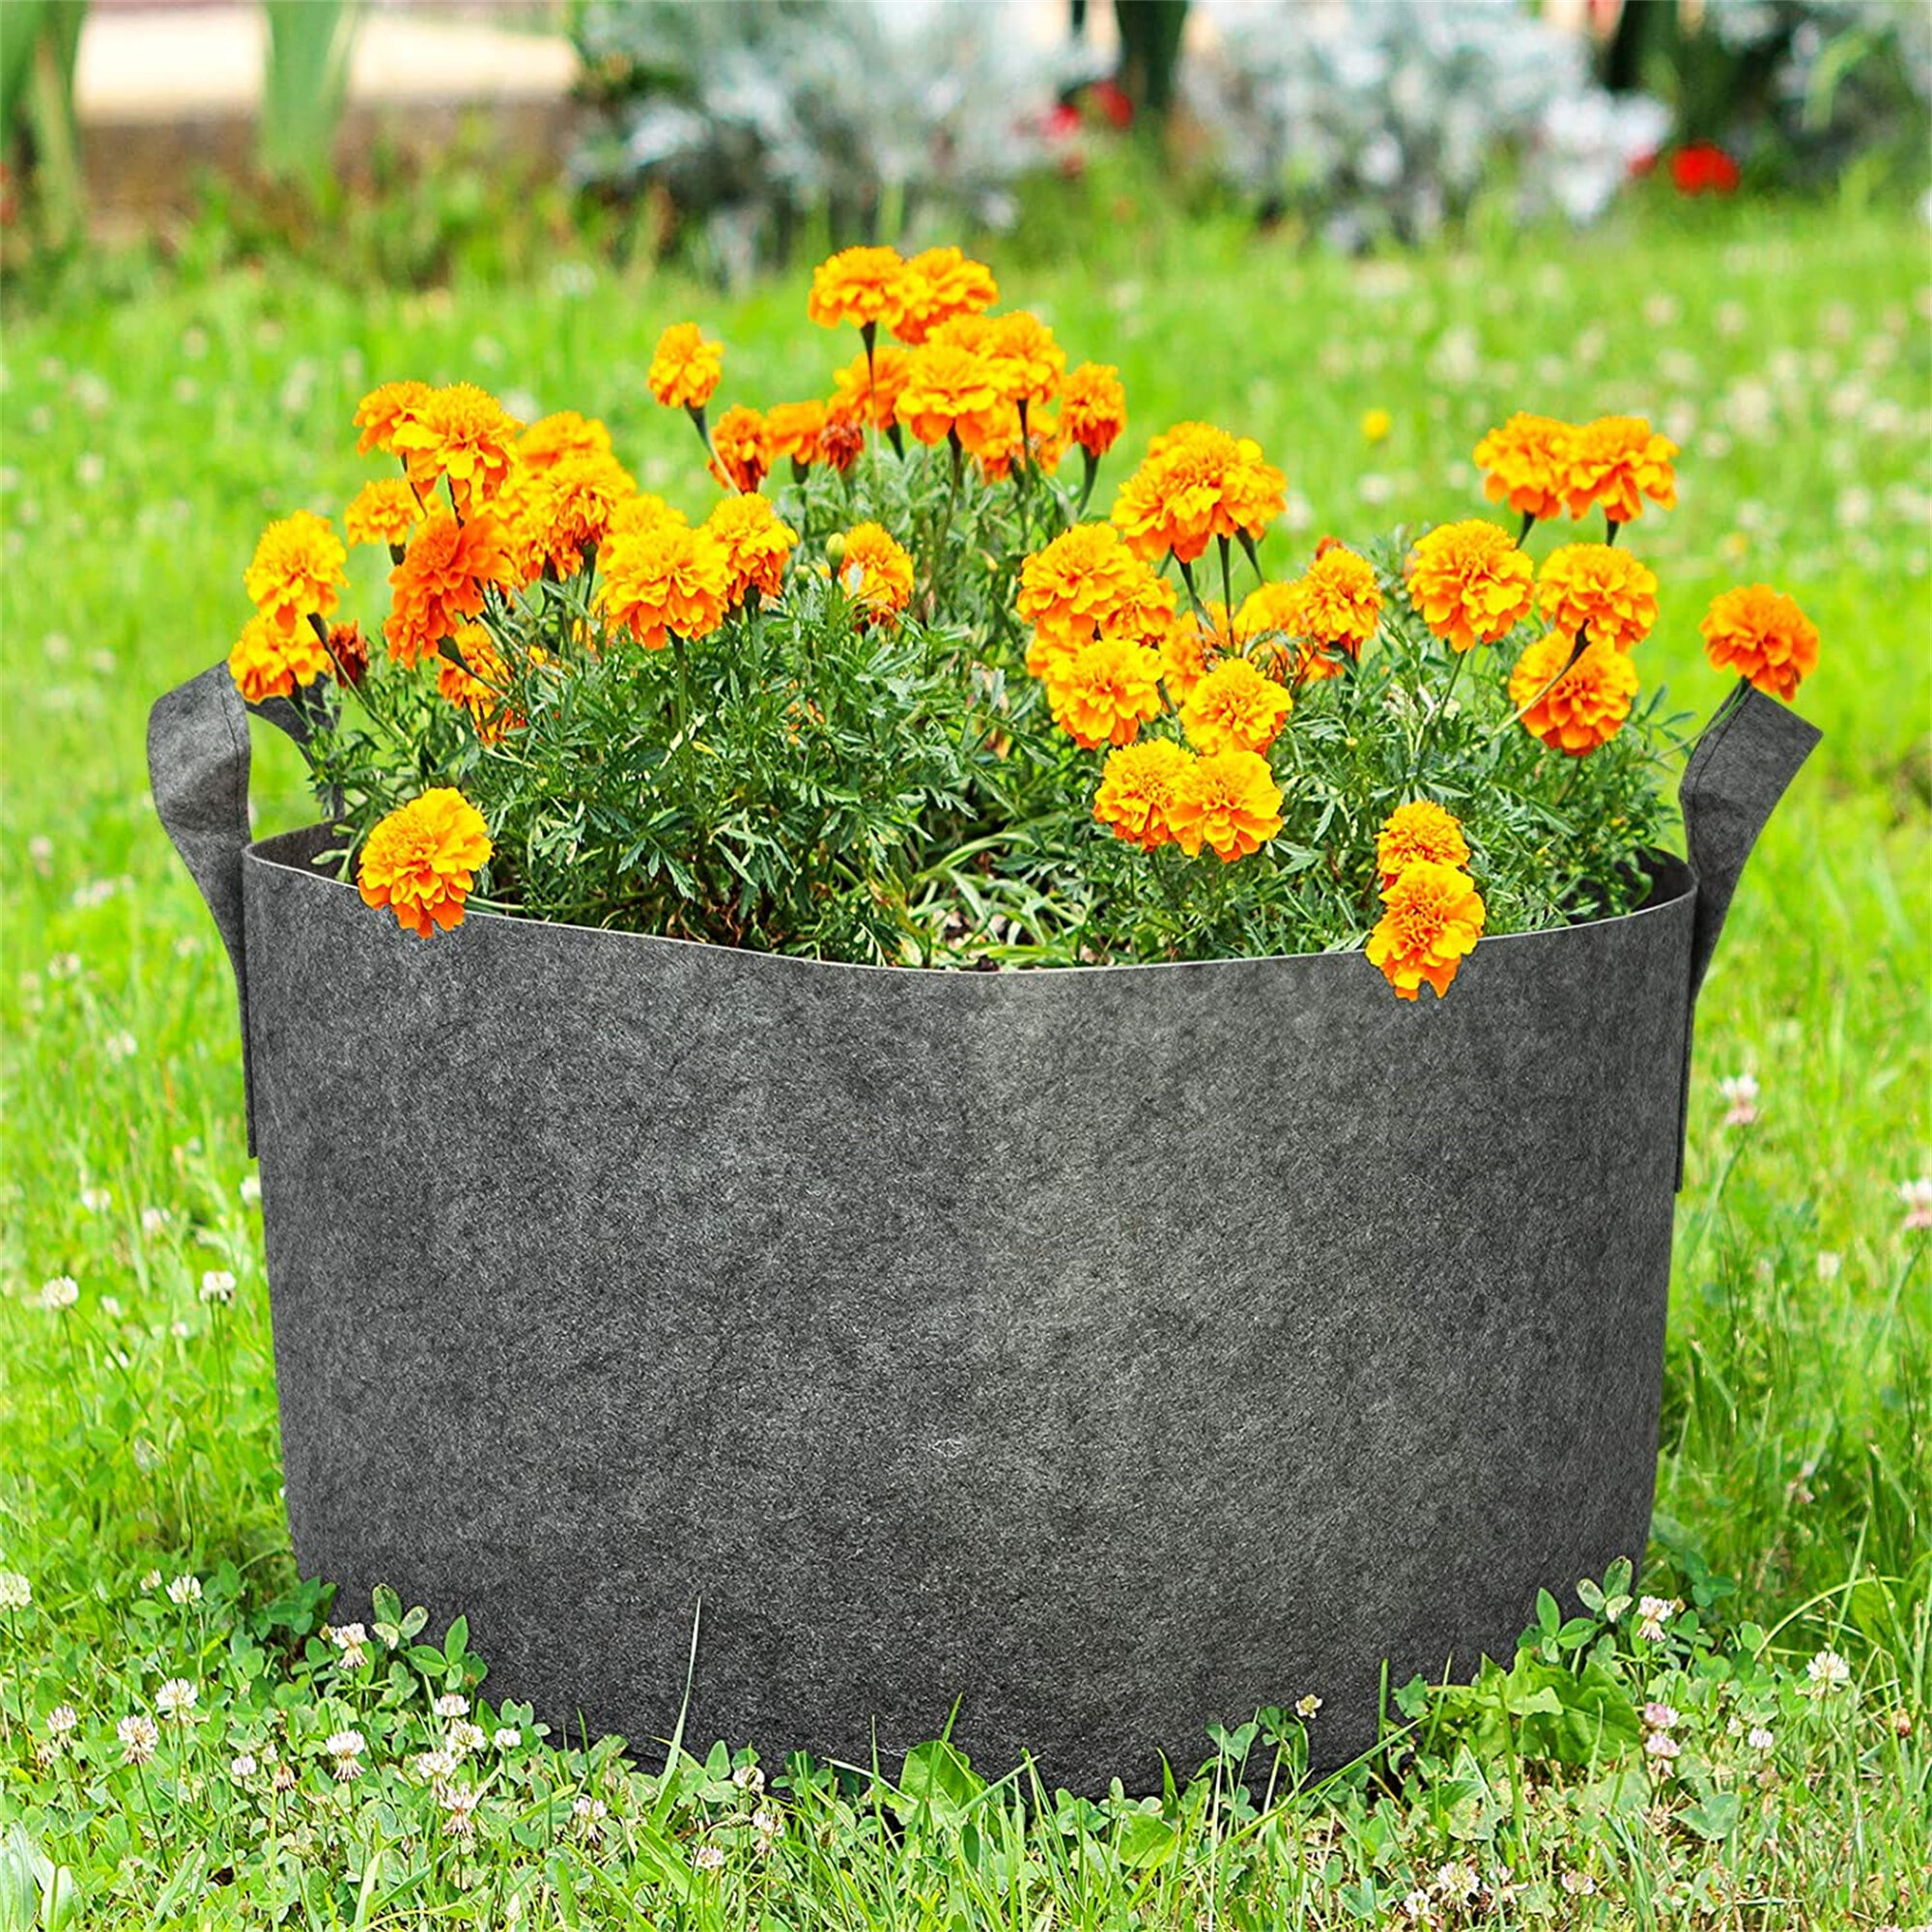 3 Pack Fabric Pots 40 Gallon Breathable Thickened Nonwoven Grow Bags Durable Garden Planter Indoor & Outdoor Raised Bed Planting Grow Bags with Handles